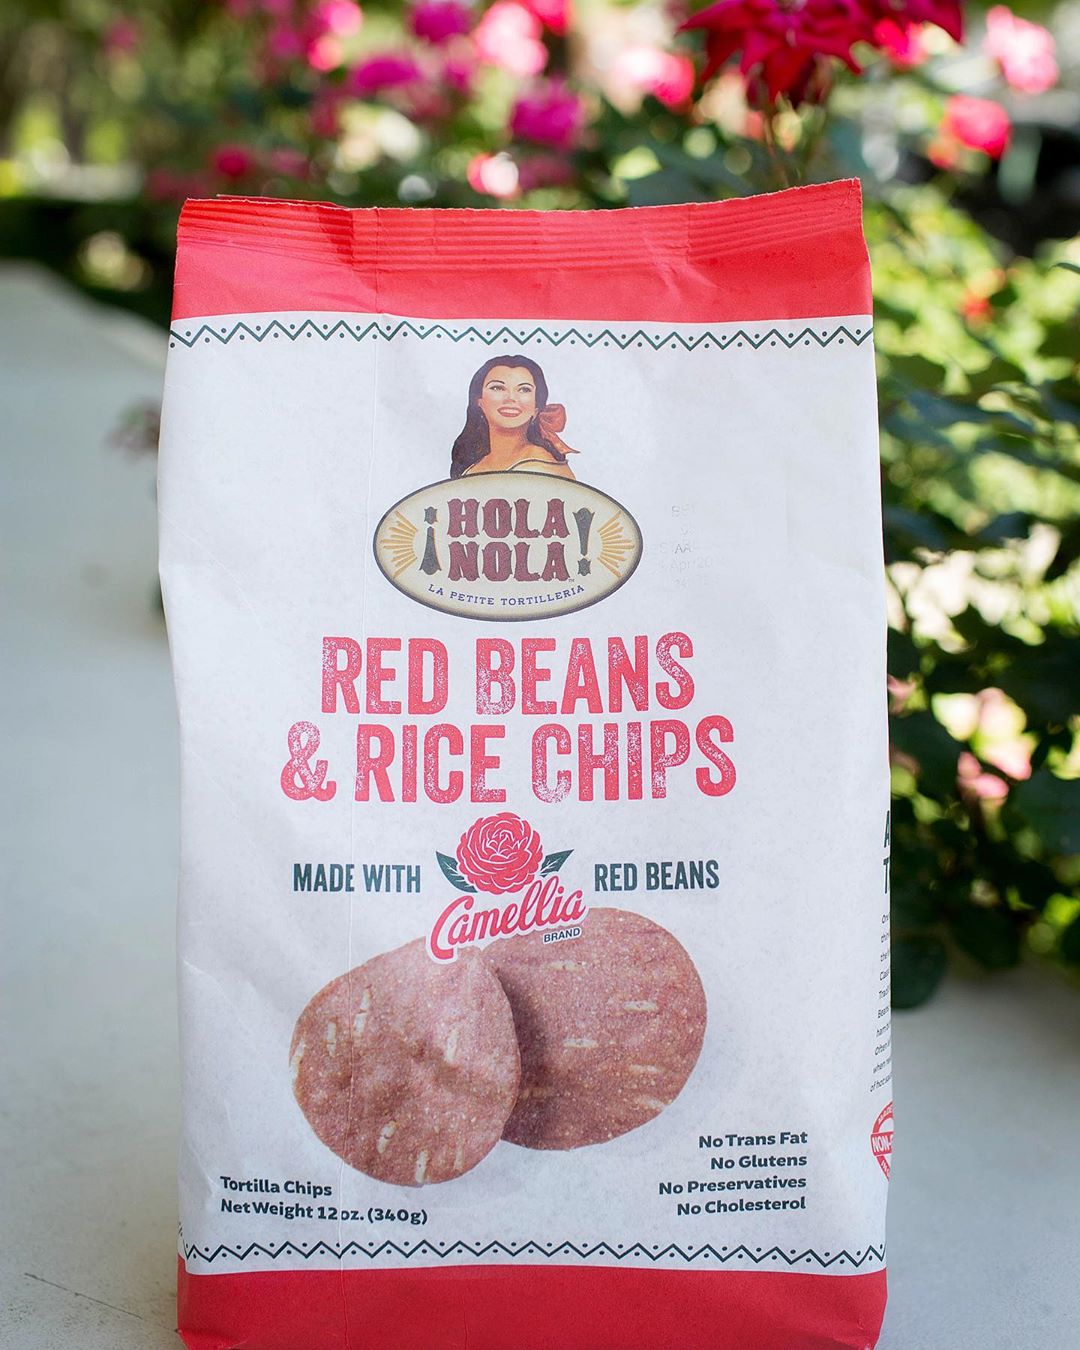 Now you can have #redbeansandrice any time you’re craving them with these chips from @holanolafoods…